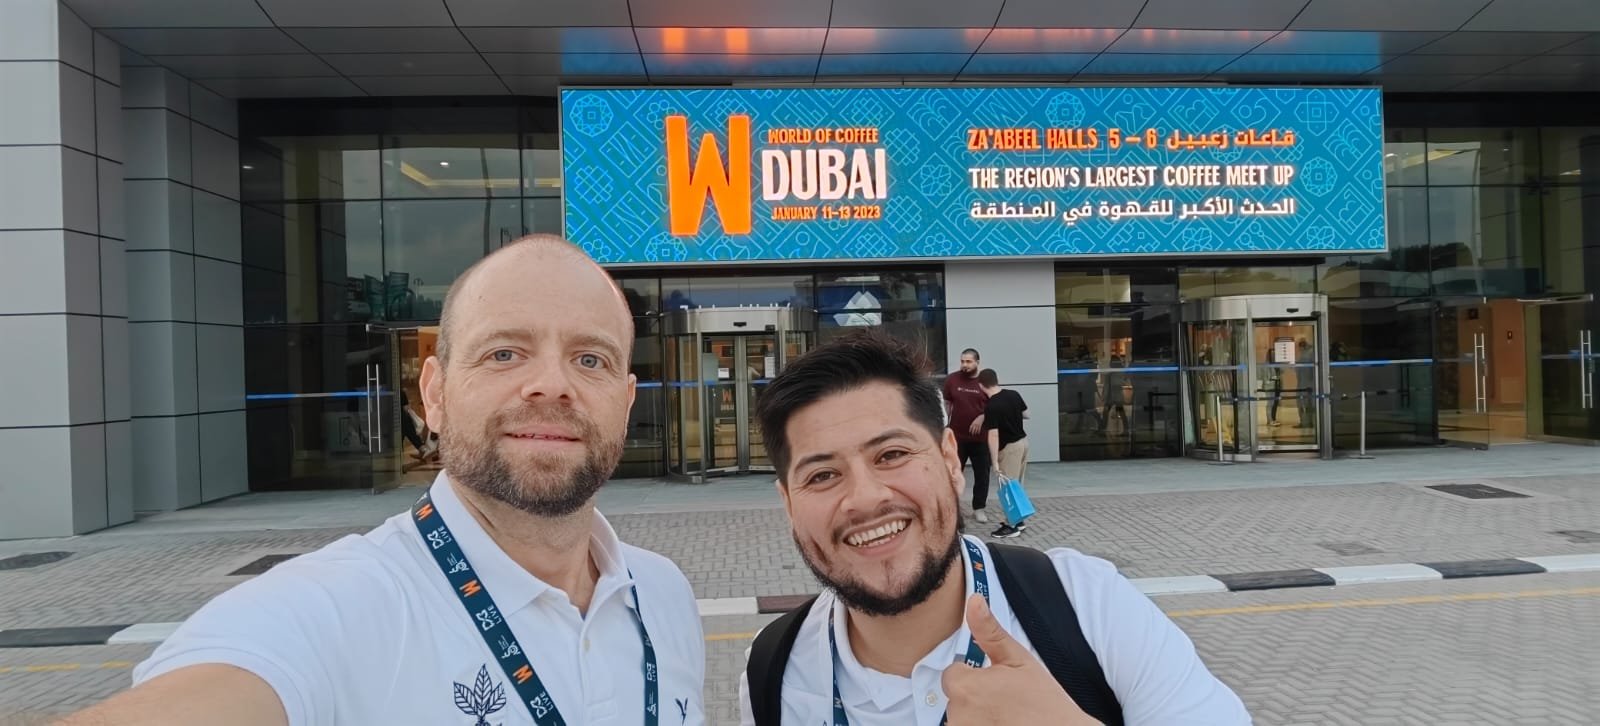 our team at the Wolrd of Coffee Dubai